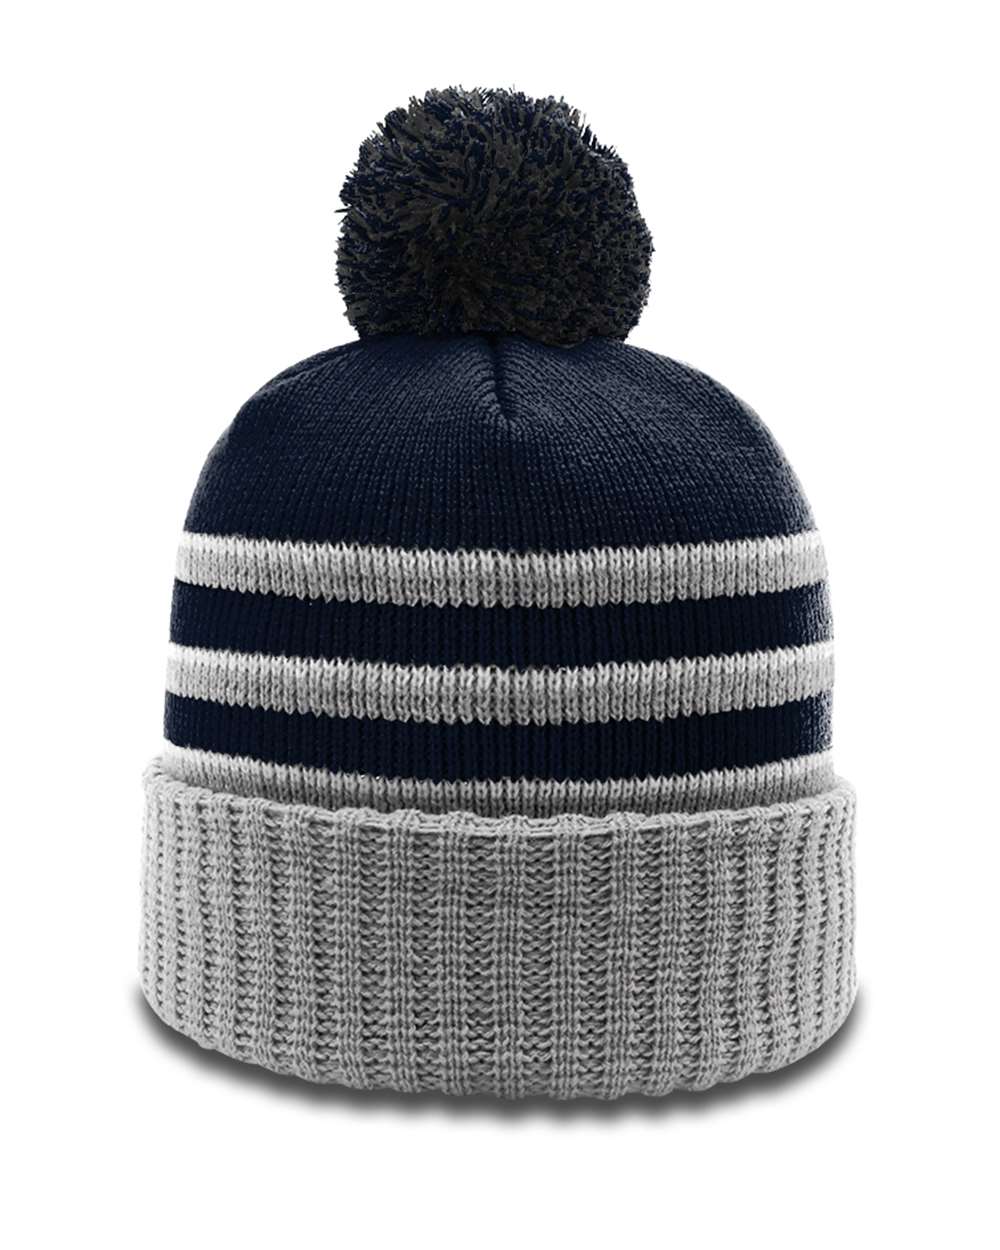 click to view Navy/ Grey/ White